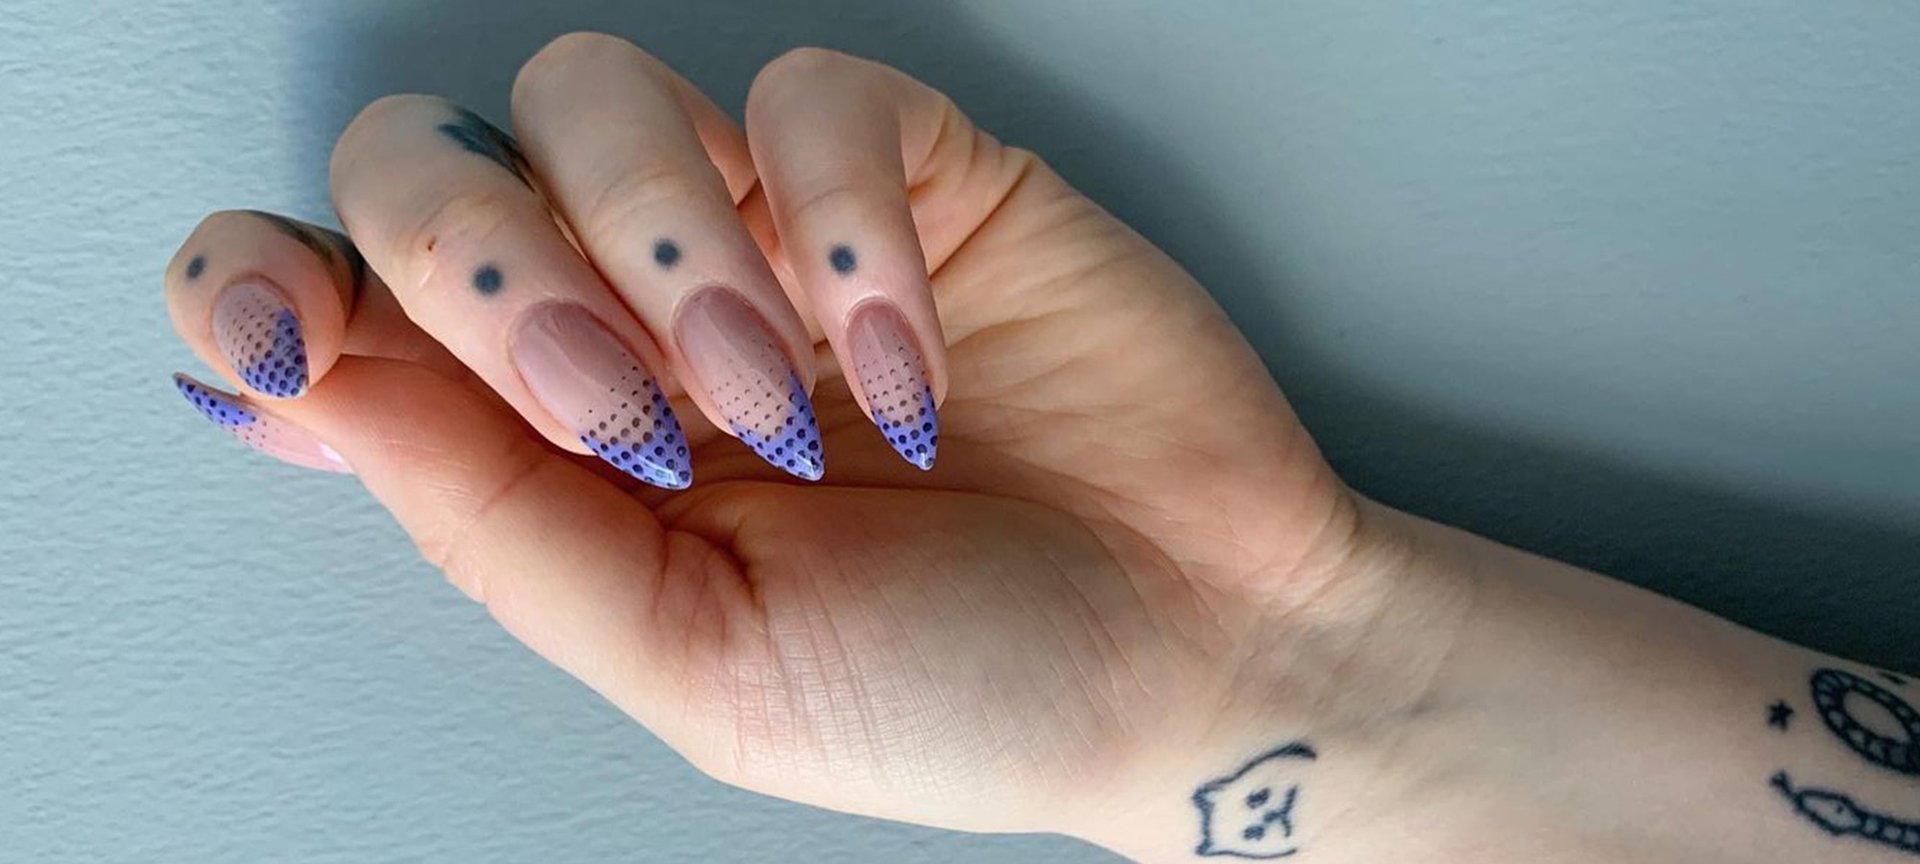 4 Witchy Nail Art Ideas That Are Stunningly Spooky – Maniology-thanhphatduhoc.com.vn